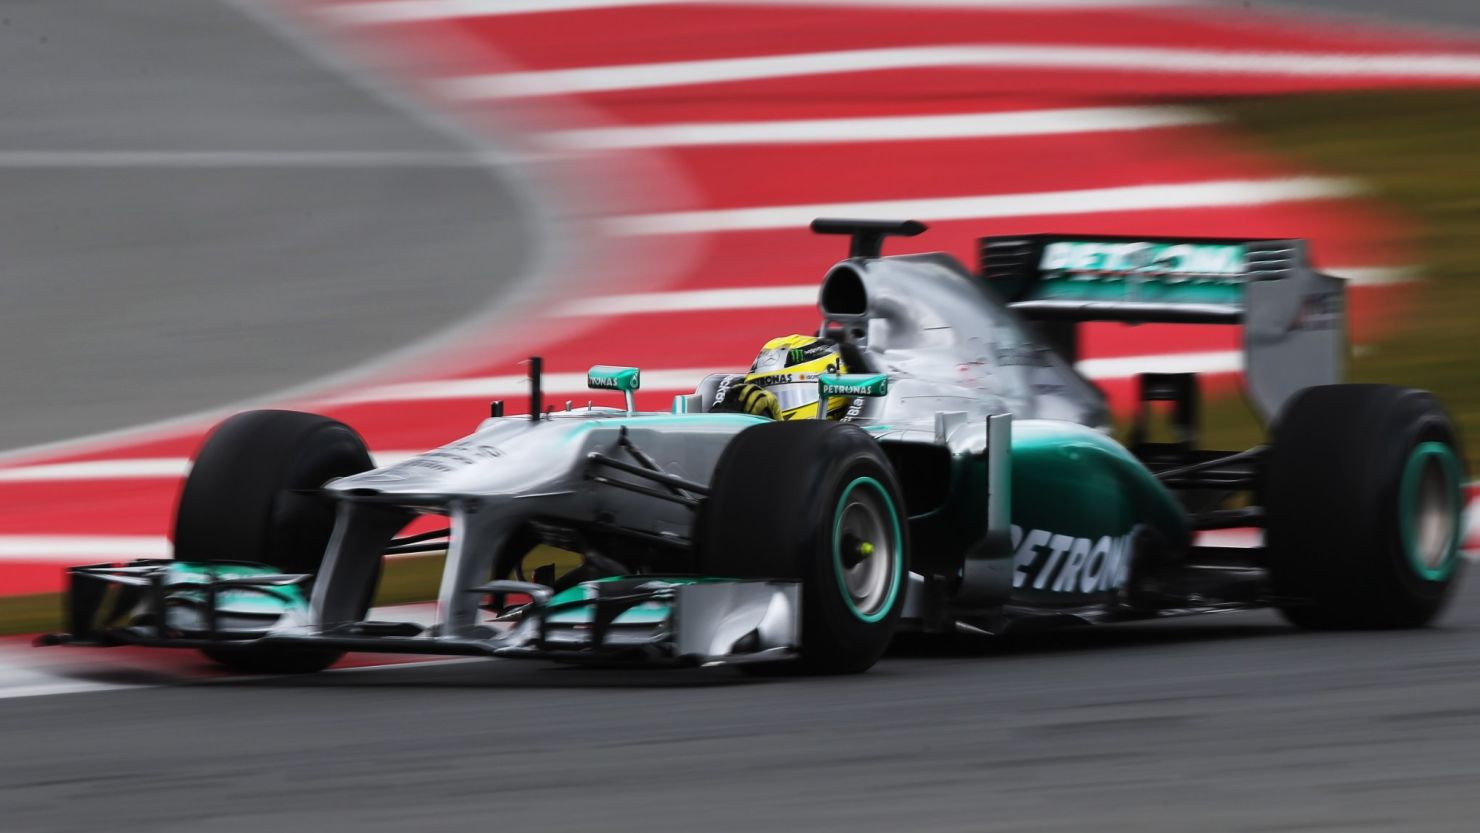 Nico Rosberg was the fastest man on the track at the final day of testing at Barcelona Sunday.